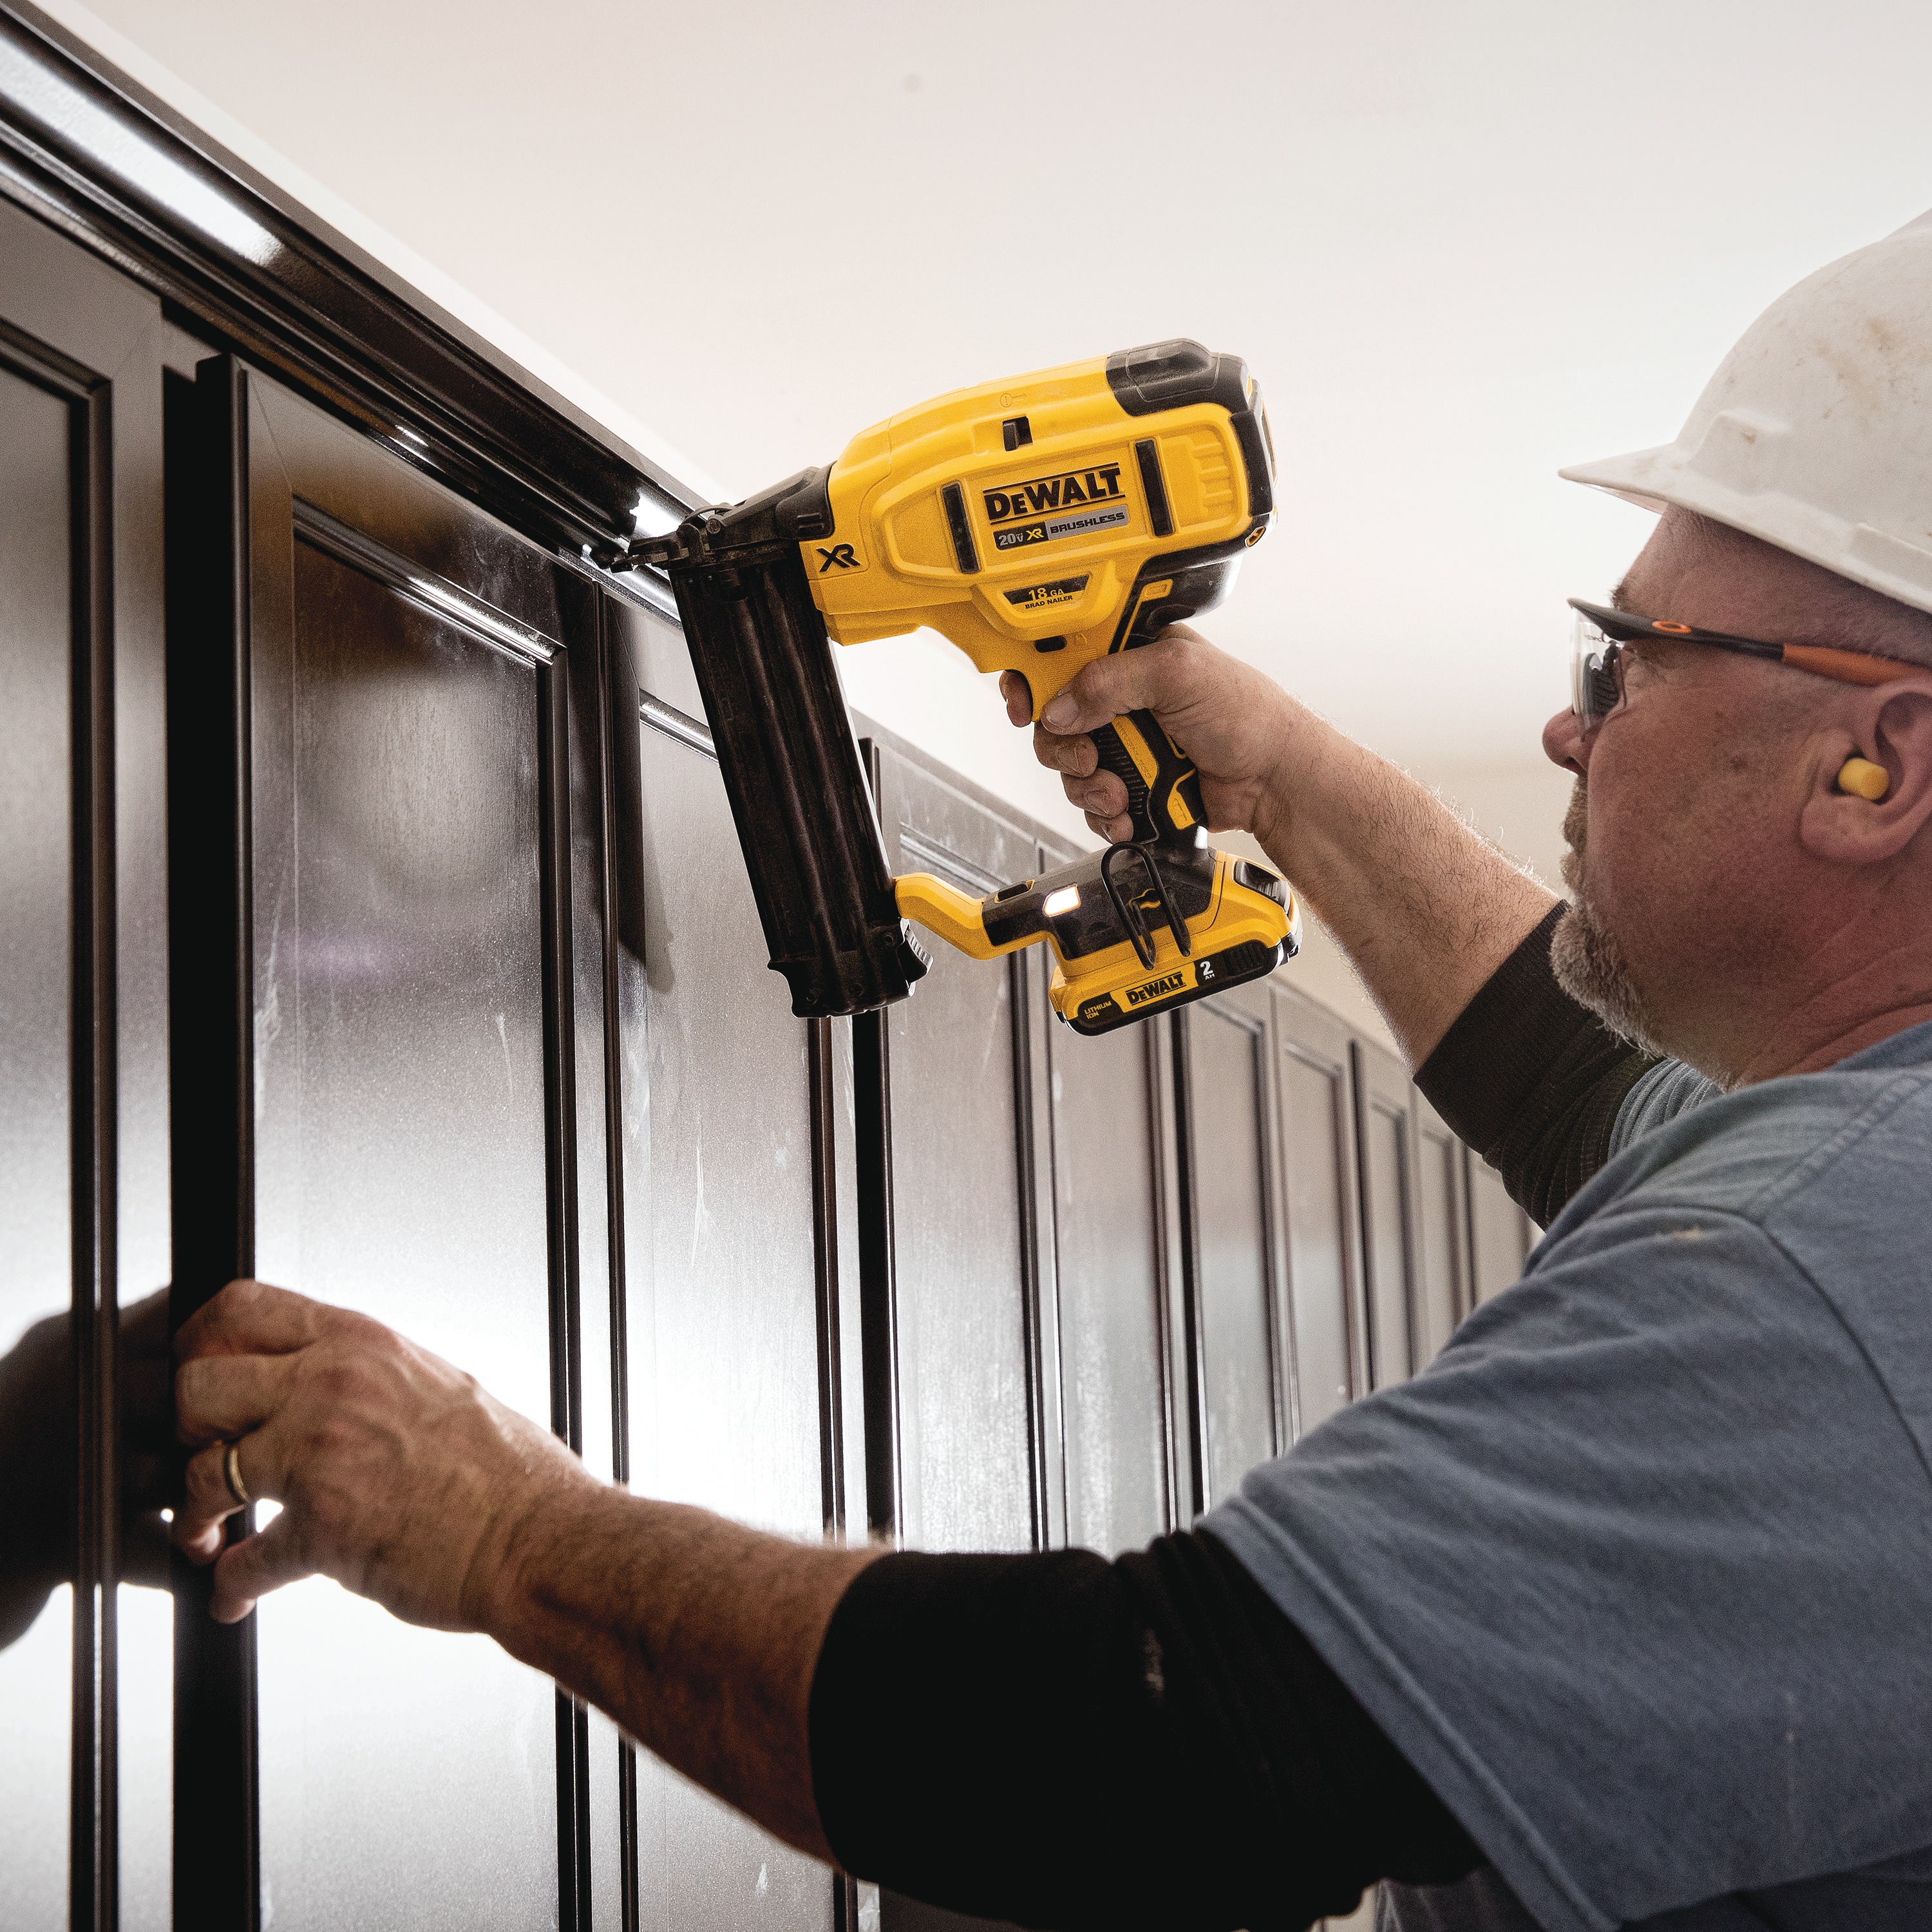 XR 18 gauge Cordless Brad Nailer in action on a wooden wall by a construction worker